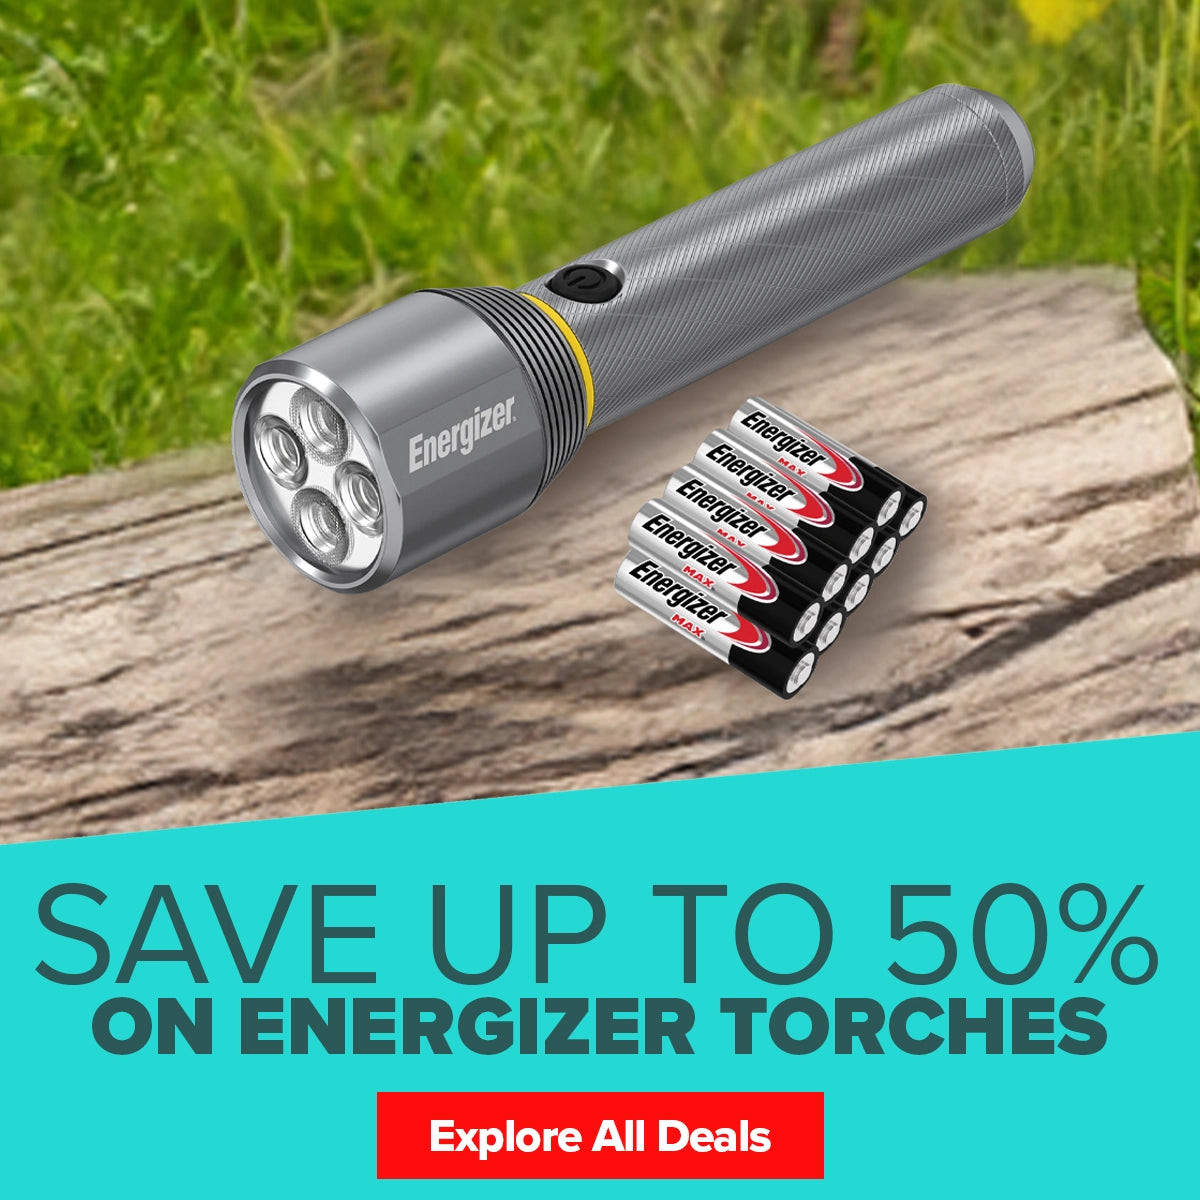 Up to 50% off Energizer torches this Father's Day at Maplin